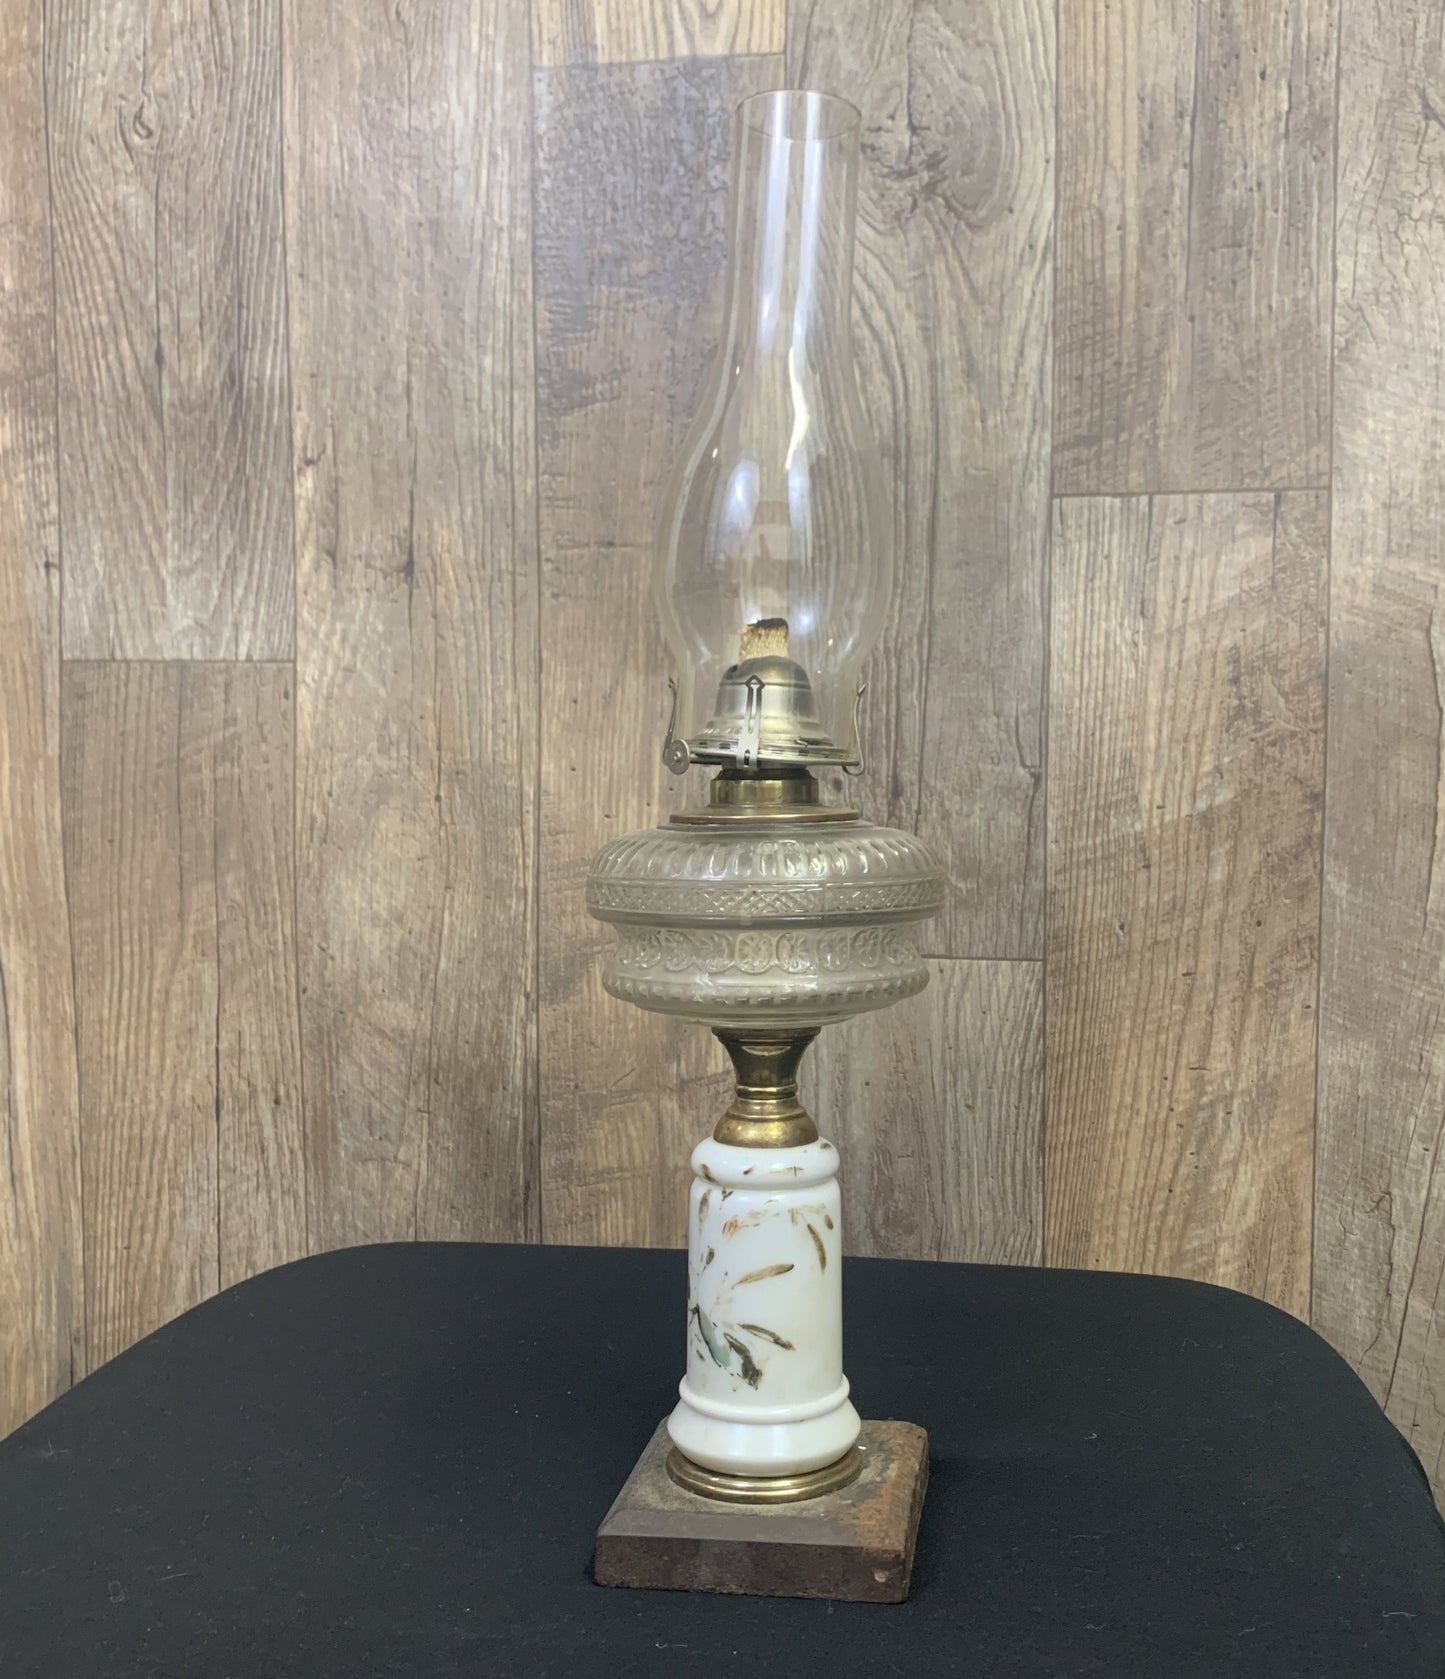 Antique EAPG Oil Lamp Hand Painted Milk Glass Pedestal Early American Pressed Glass, White Flame Burner